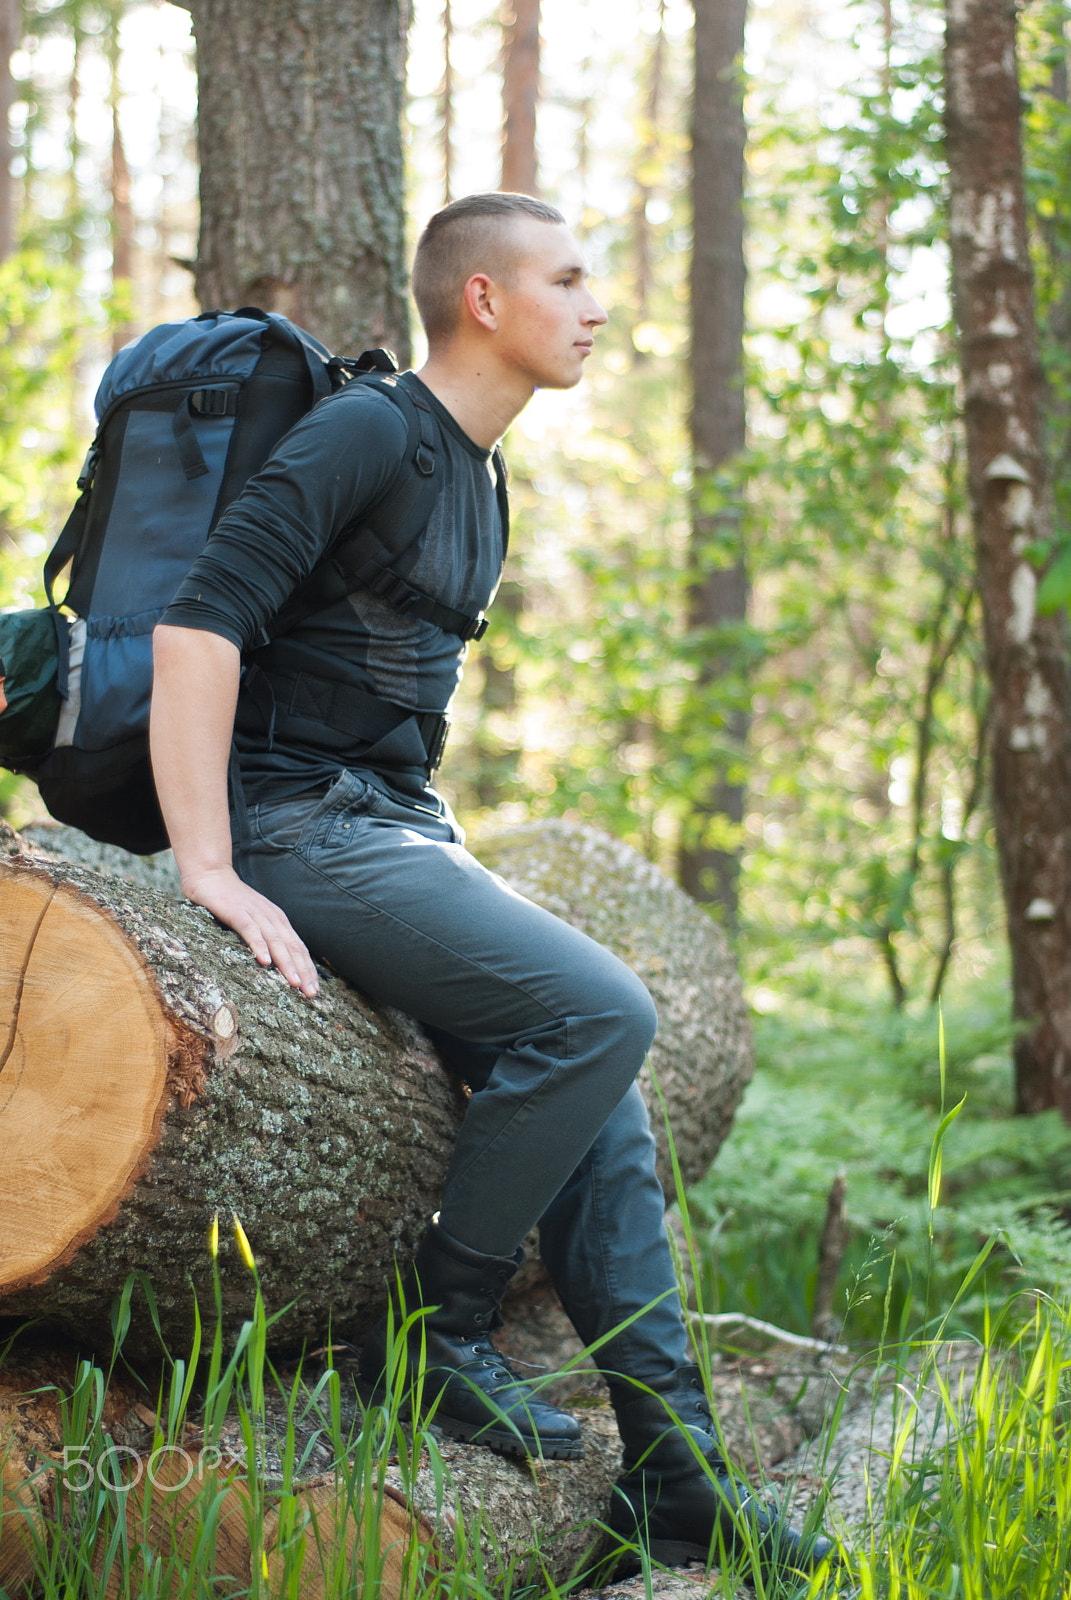 Nikon D80 + AF Nikkor 50mm f/1.8 N sample photo. A tired young hiker with backpack sitting on logs, photography